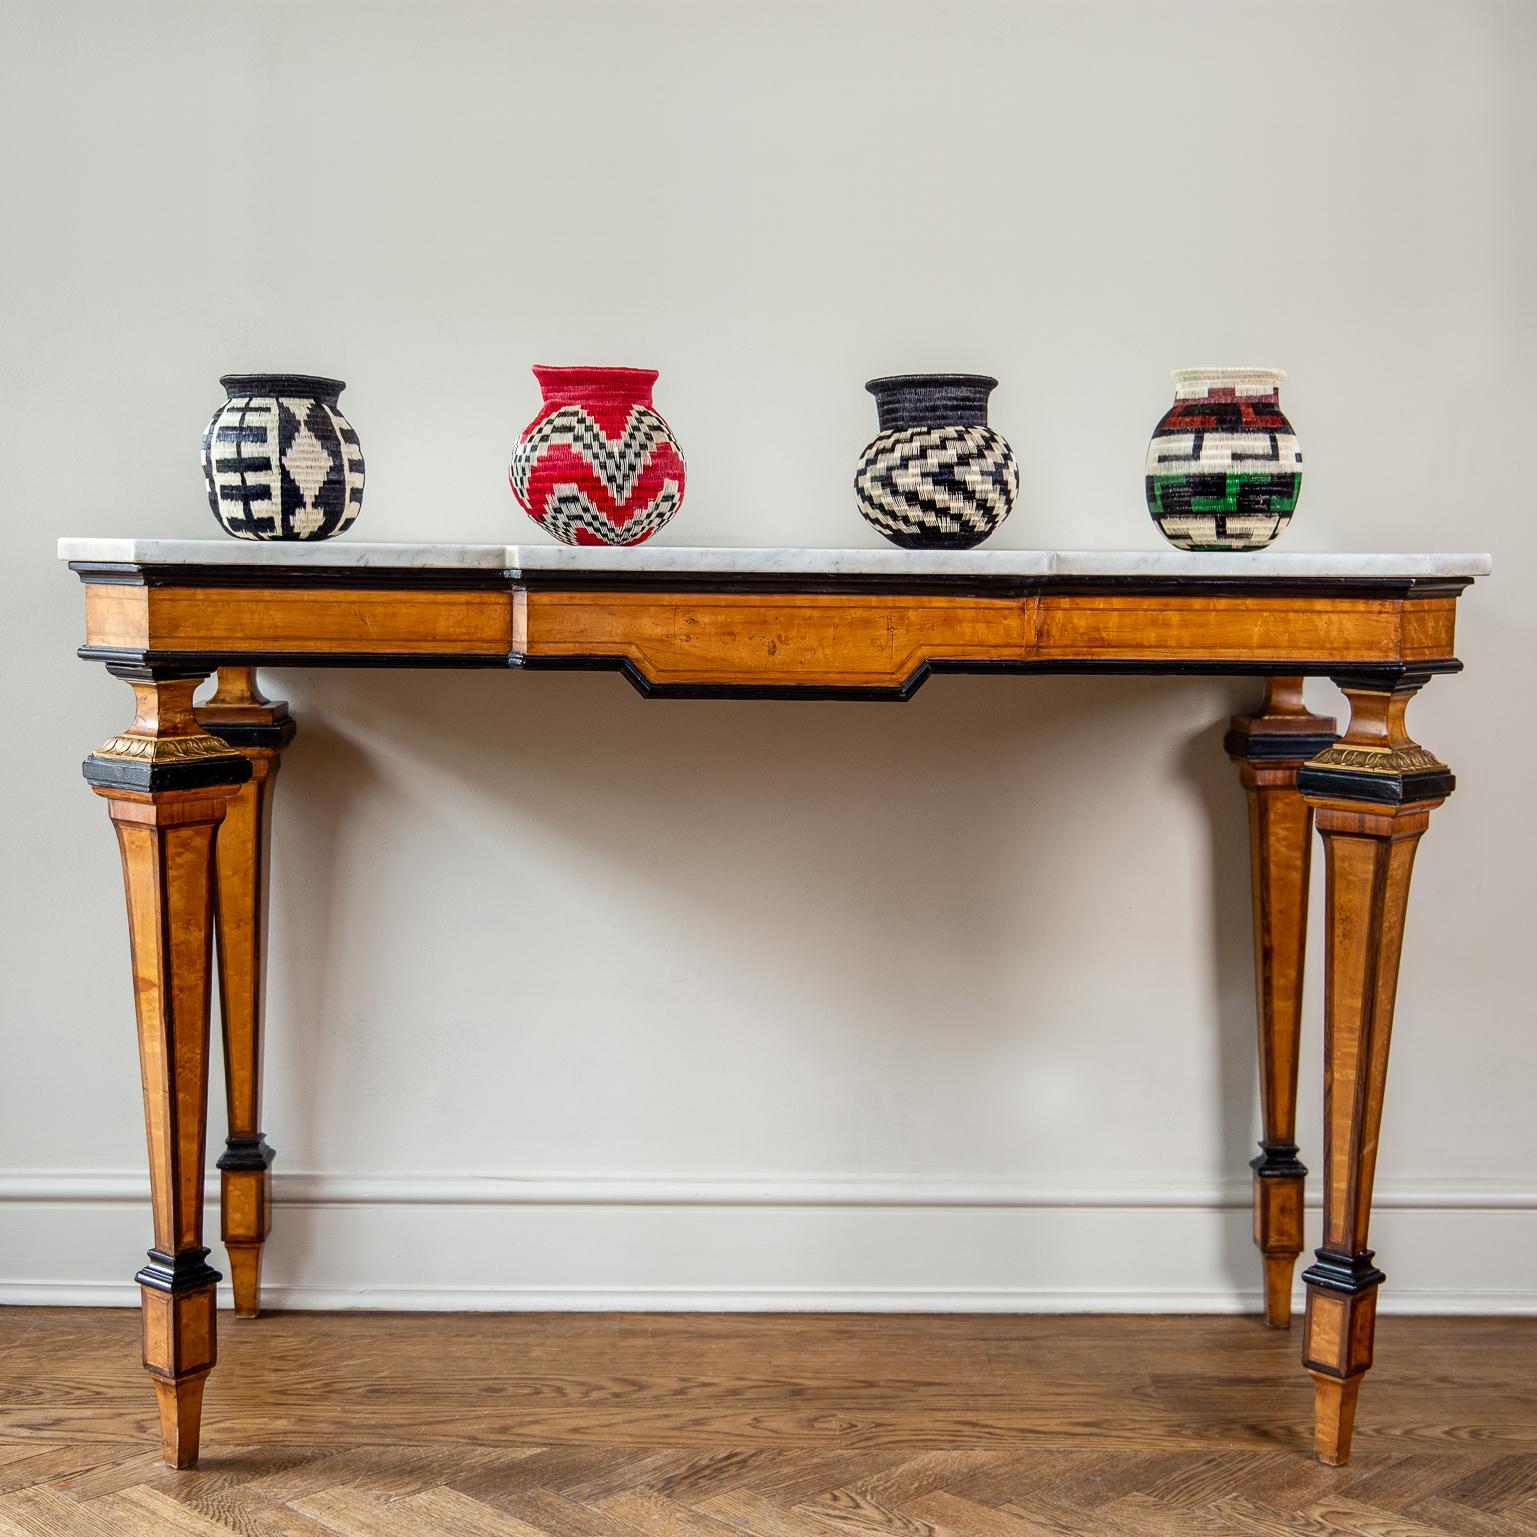 Veneer Italian Marble Topped Console Table with Graphic Lines, circa 1850